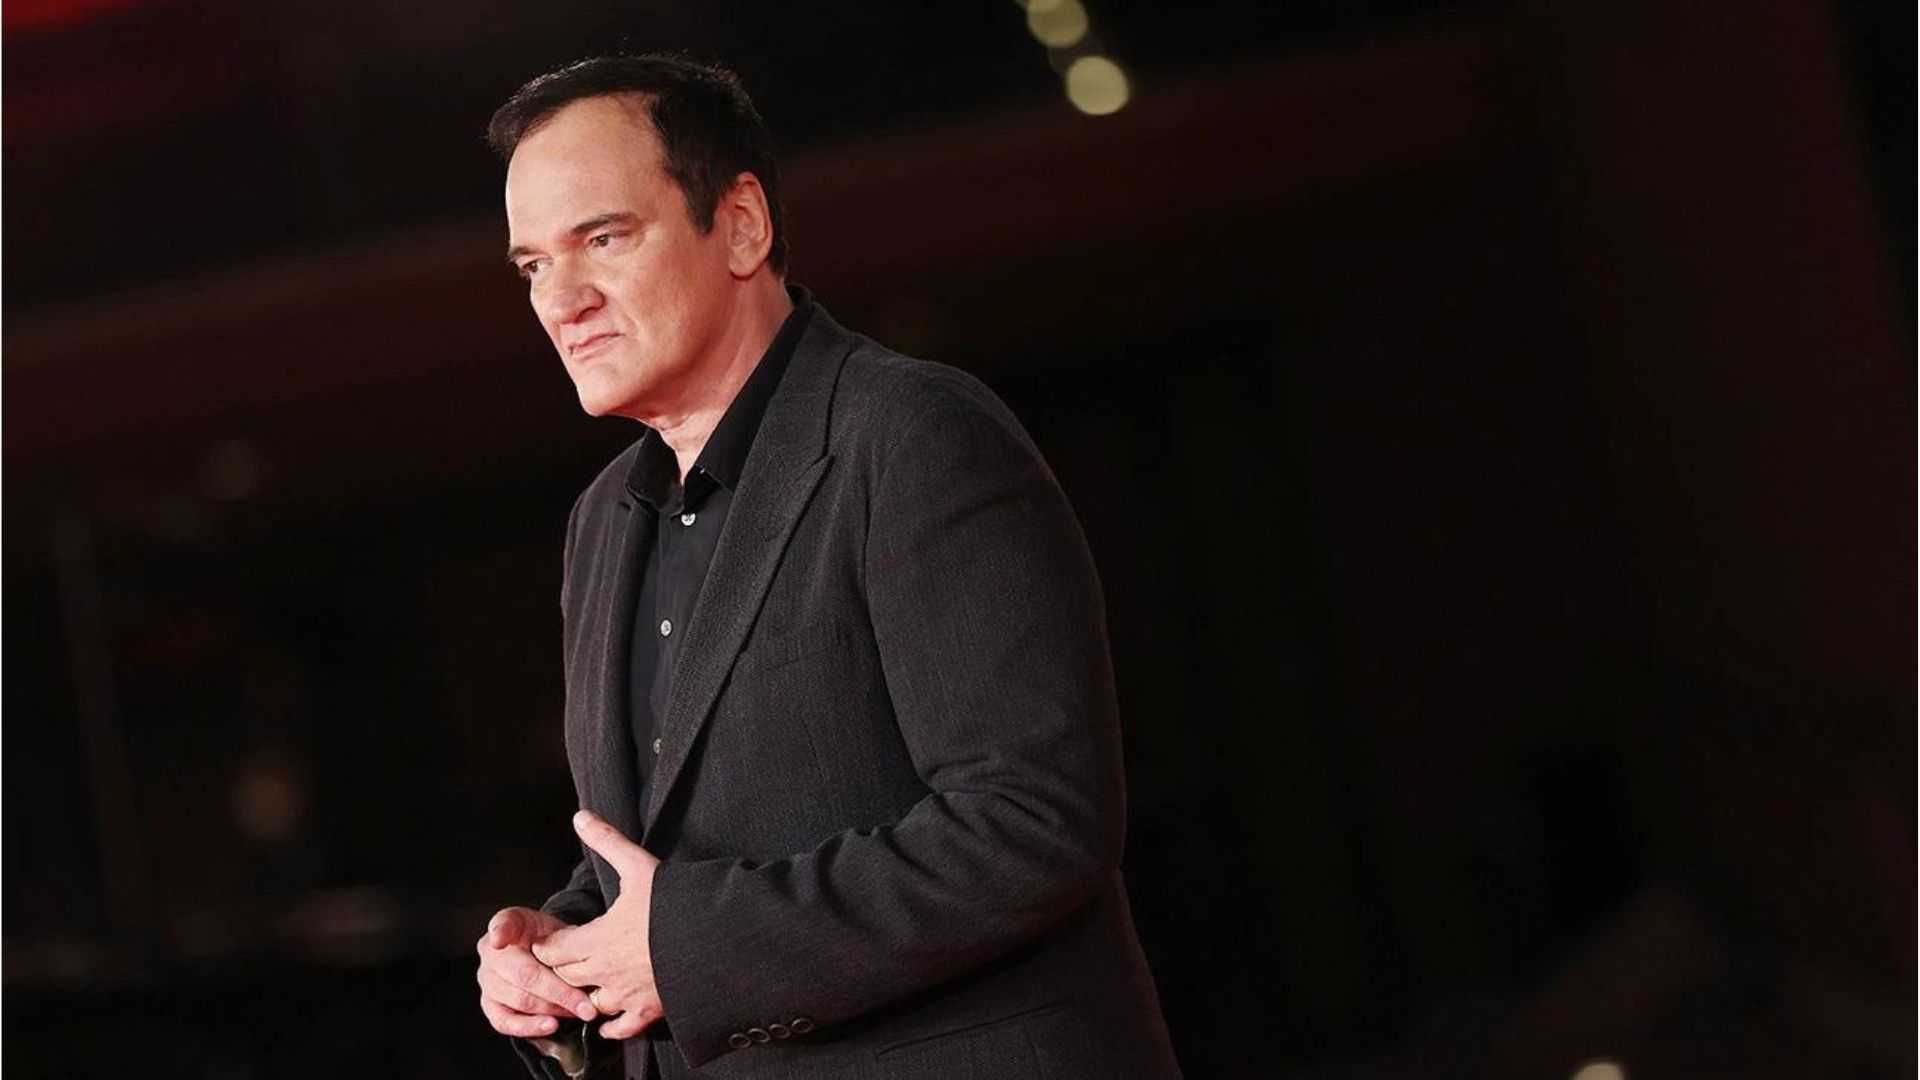 Quentin Tarantino Performing Wearing A Black Suit